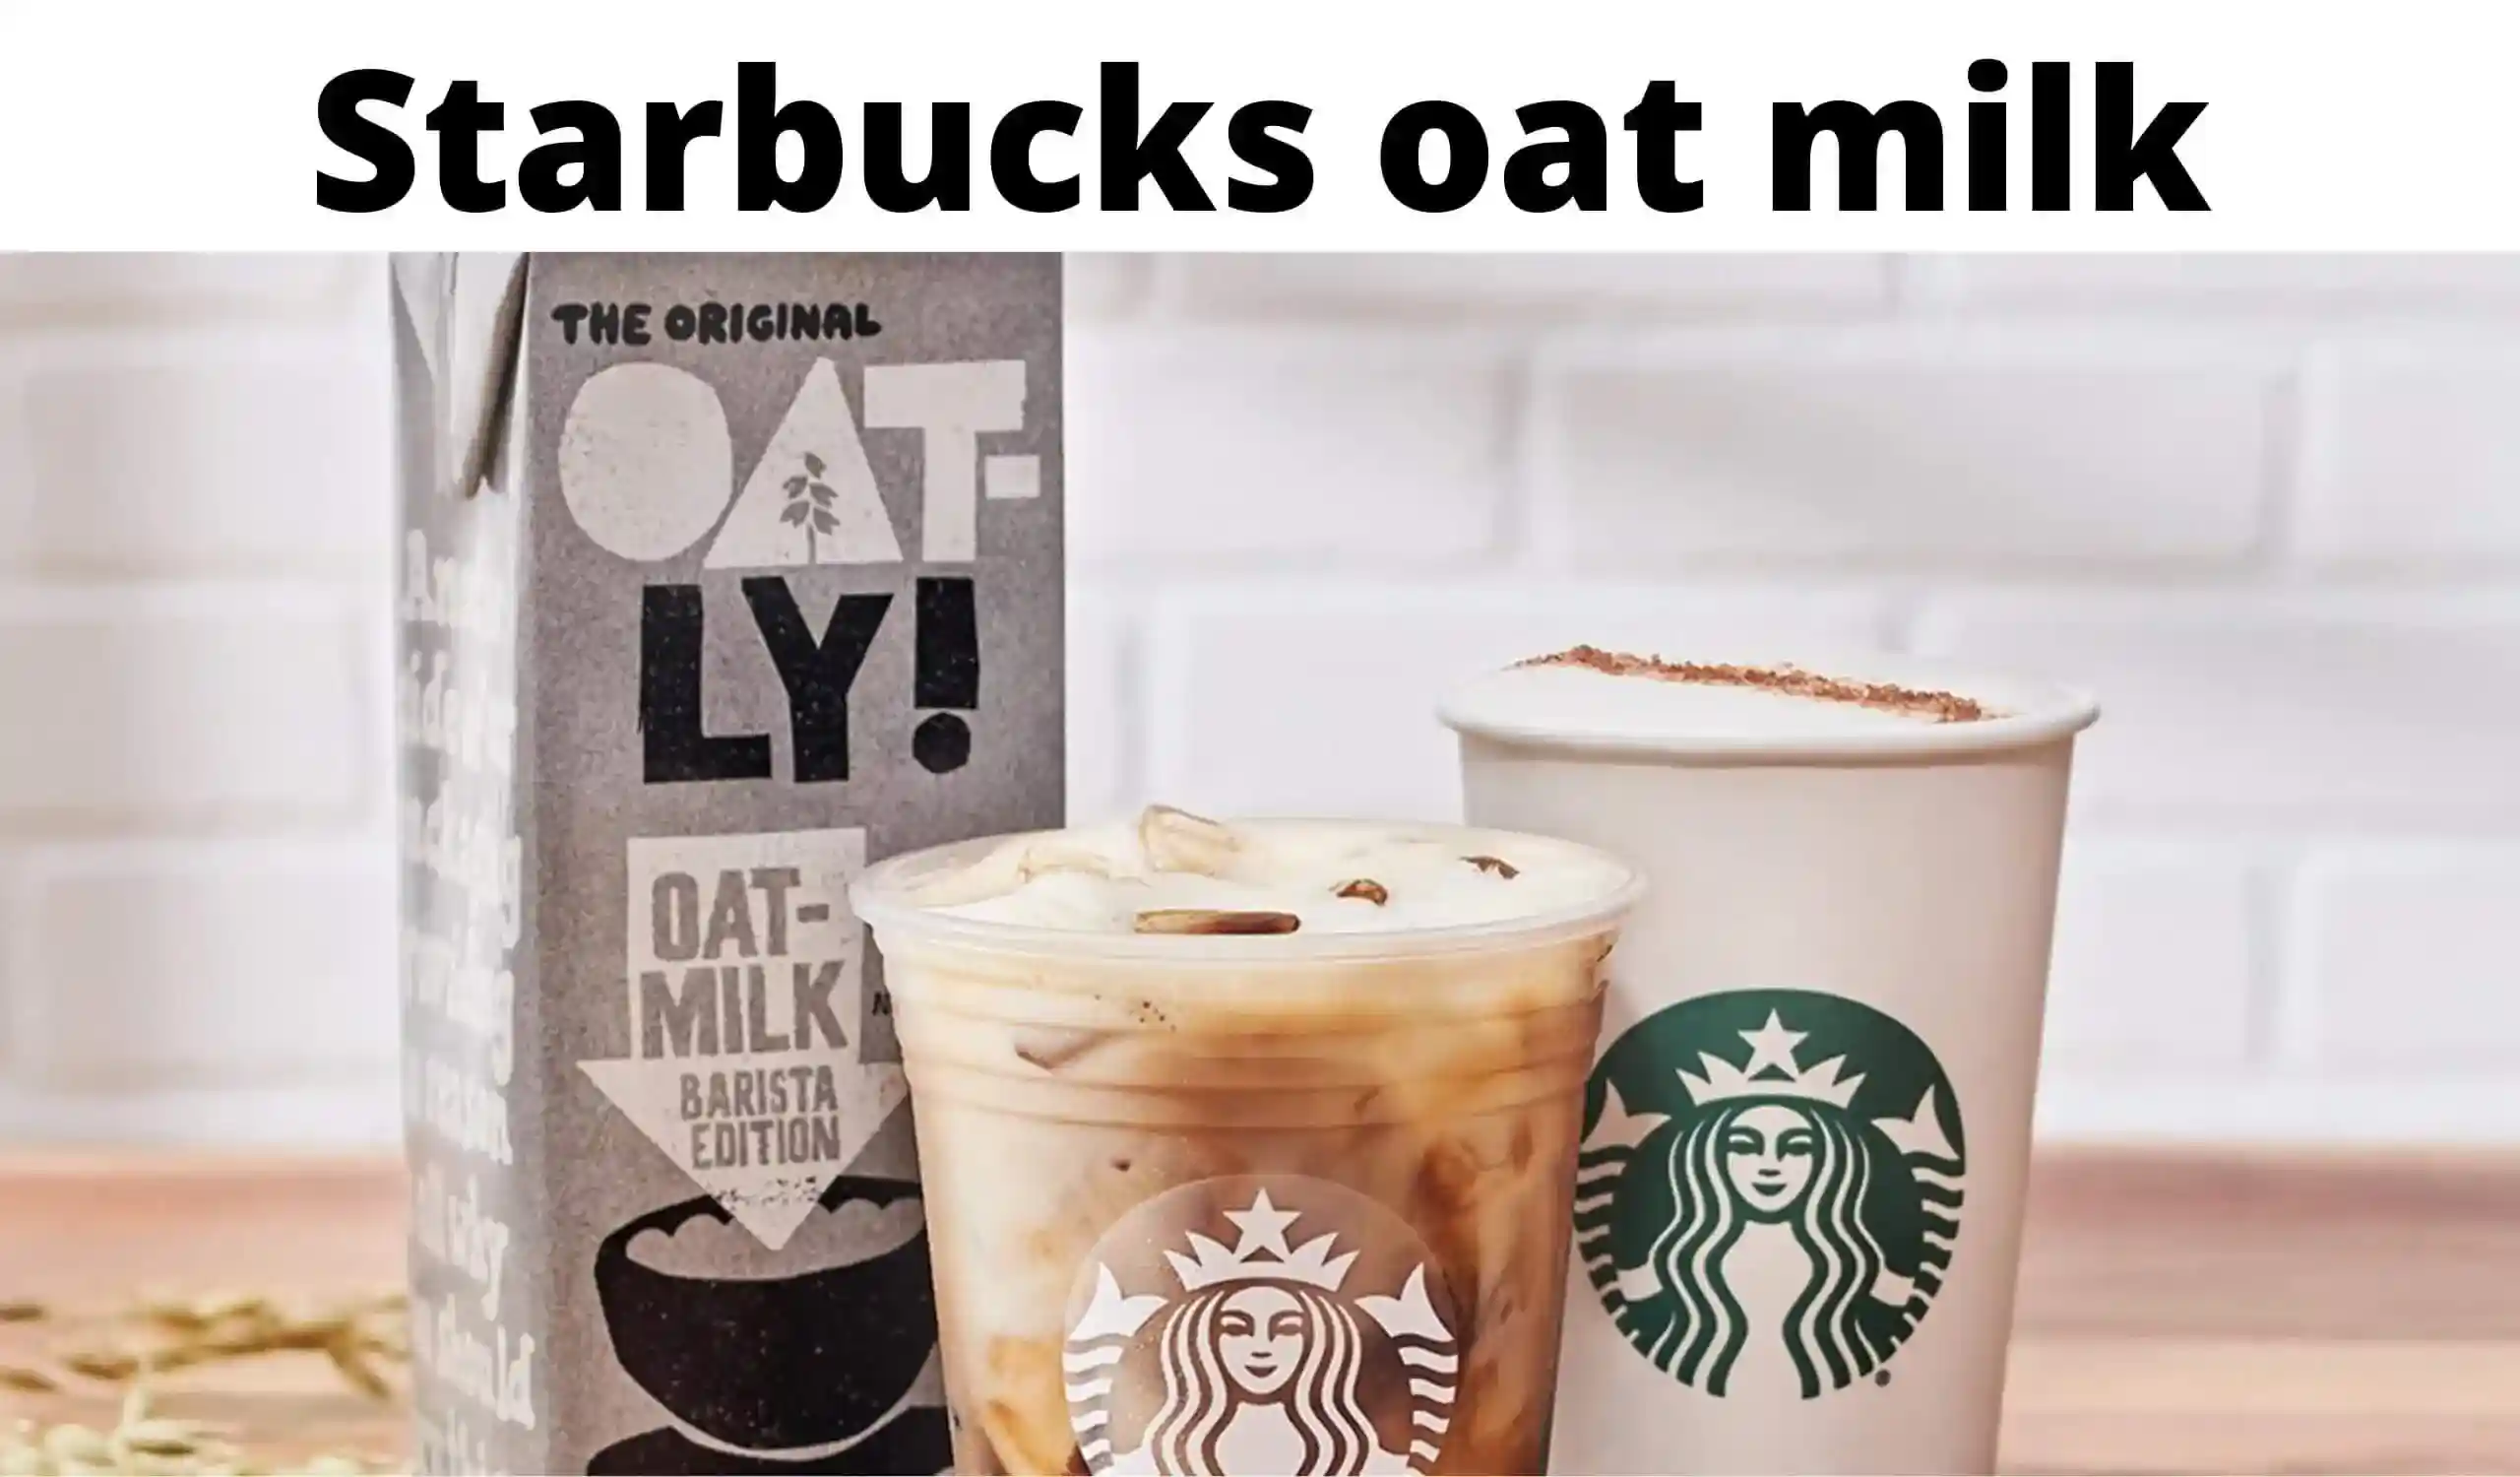 Does Starbucks Oat Milk Have Gluten? – Is It Bad For You?